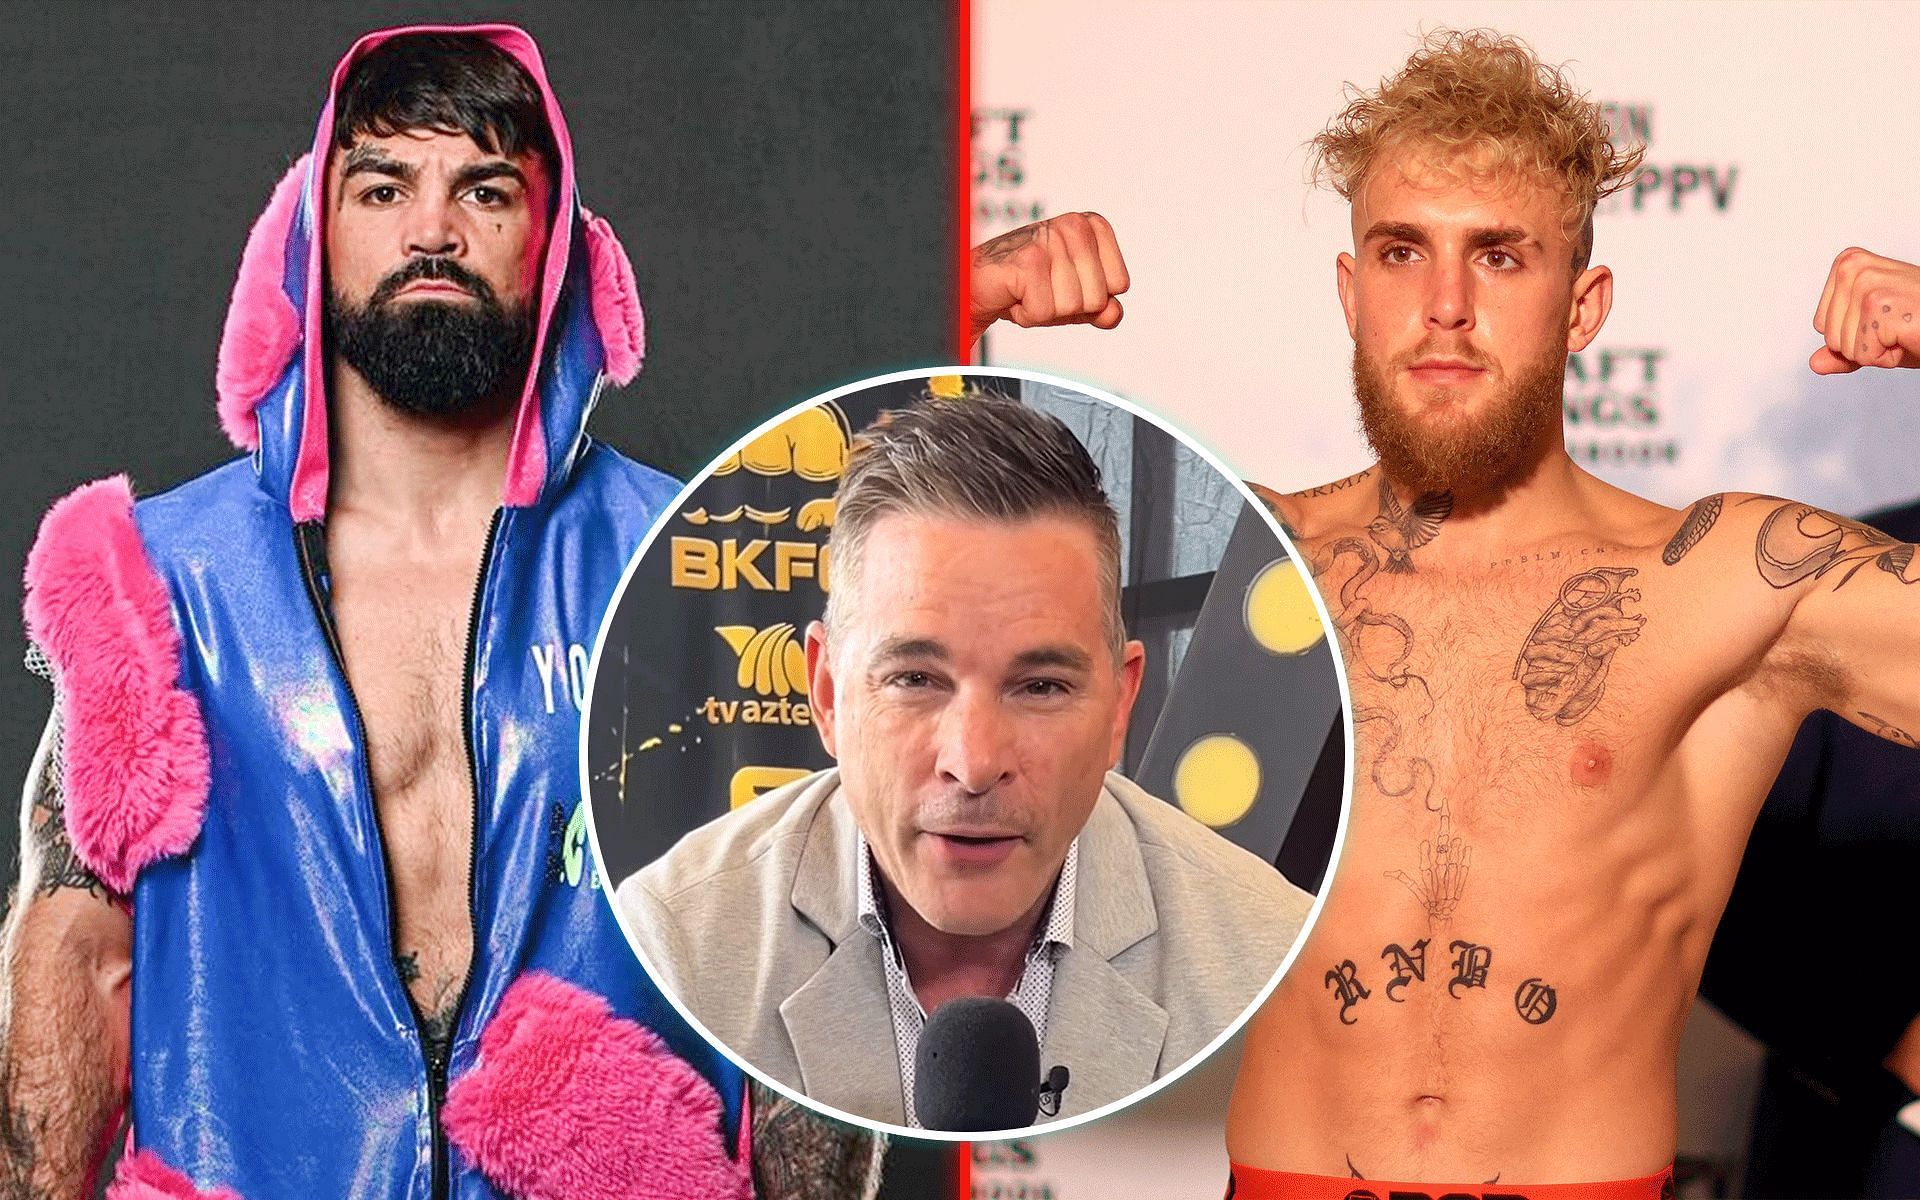 BKFC founder Dave Feldman (inset) reacts to Jake Paul (right) vs. Mike Perry (left) [Images courtesy: @azteca_deportes_network , @platinummikeperry on Instagram and Getty]